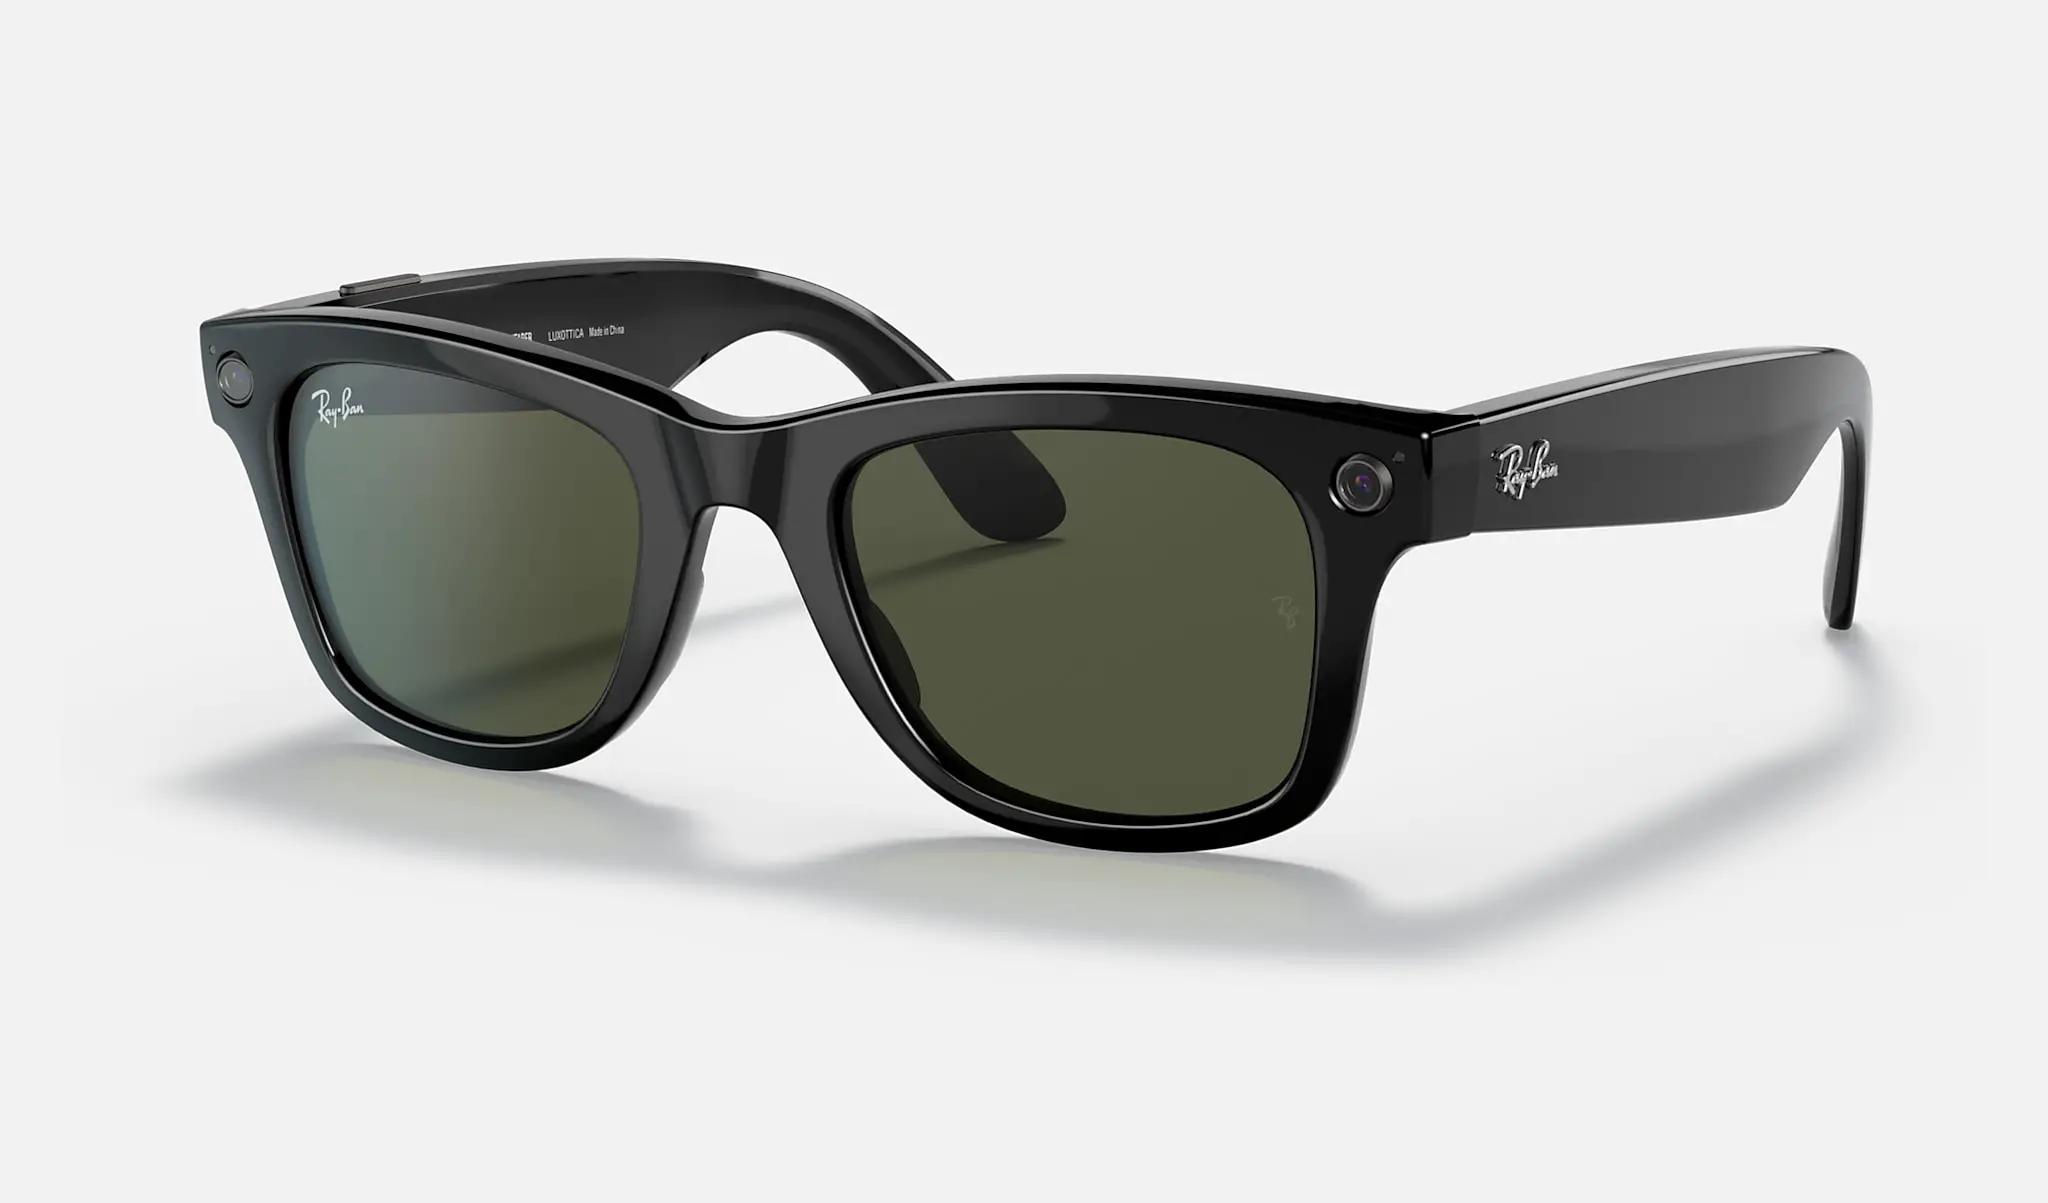 Meta's RayBan Stories smart glasses are now available from TMobile